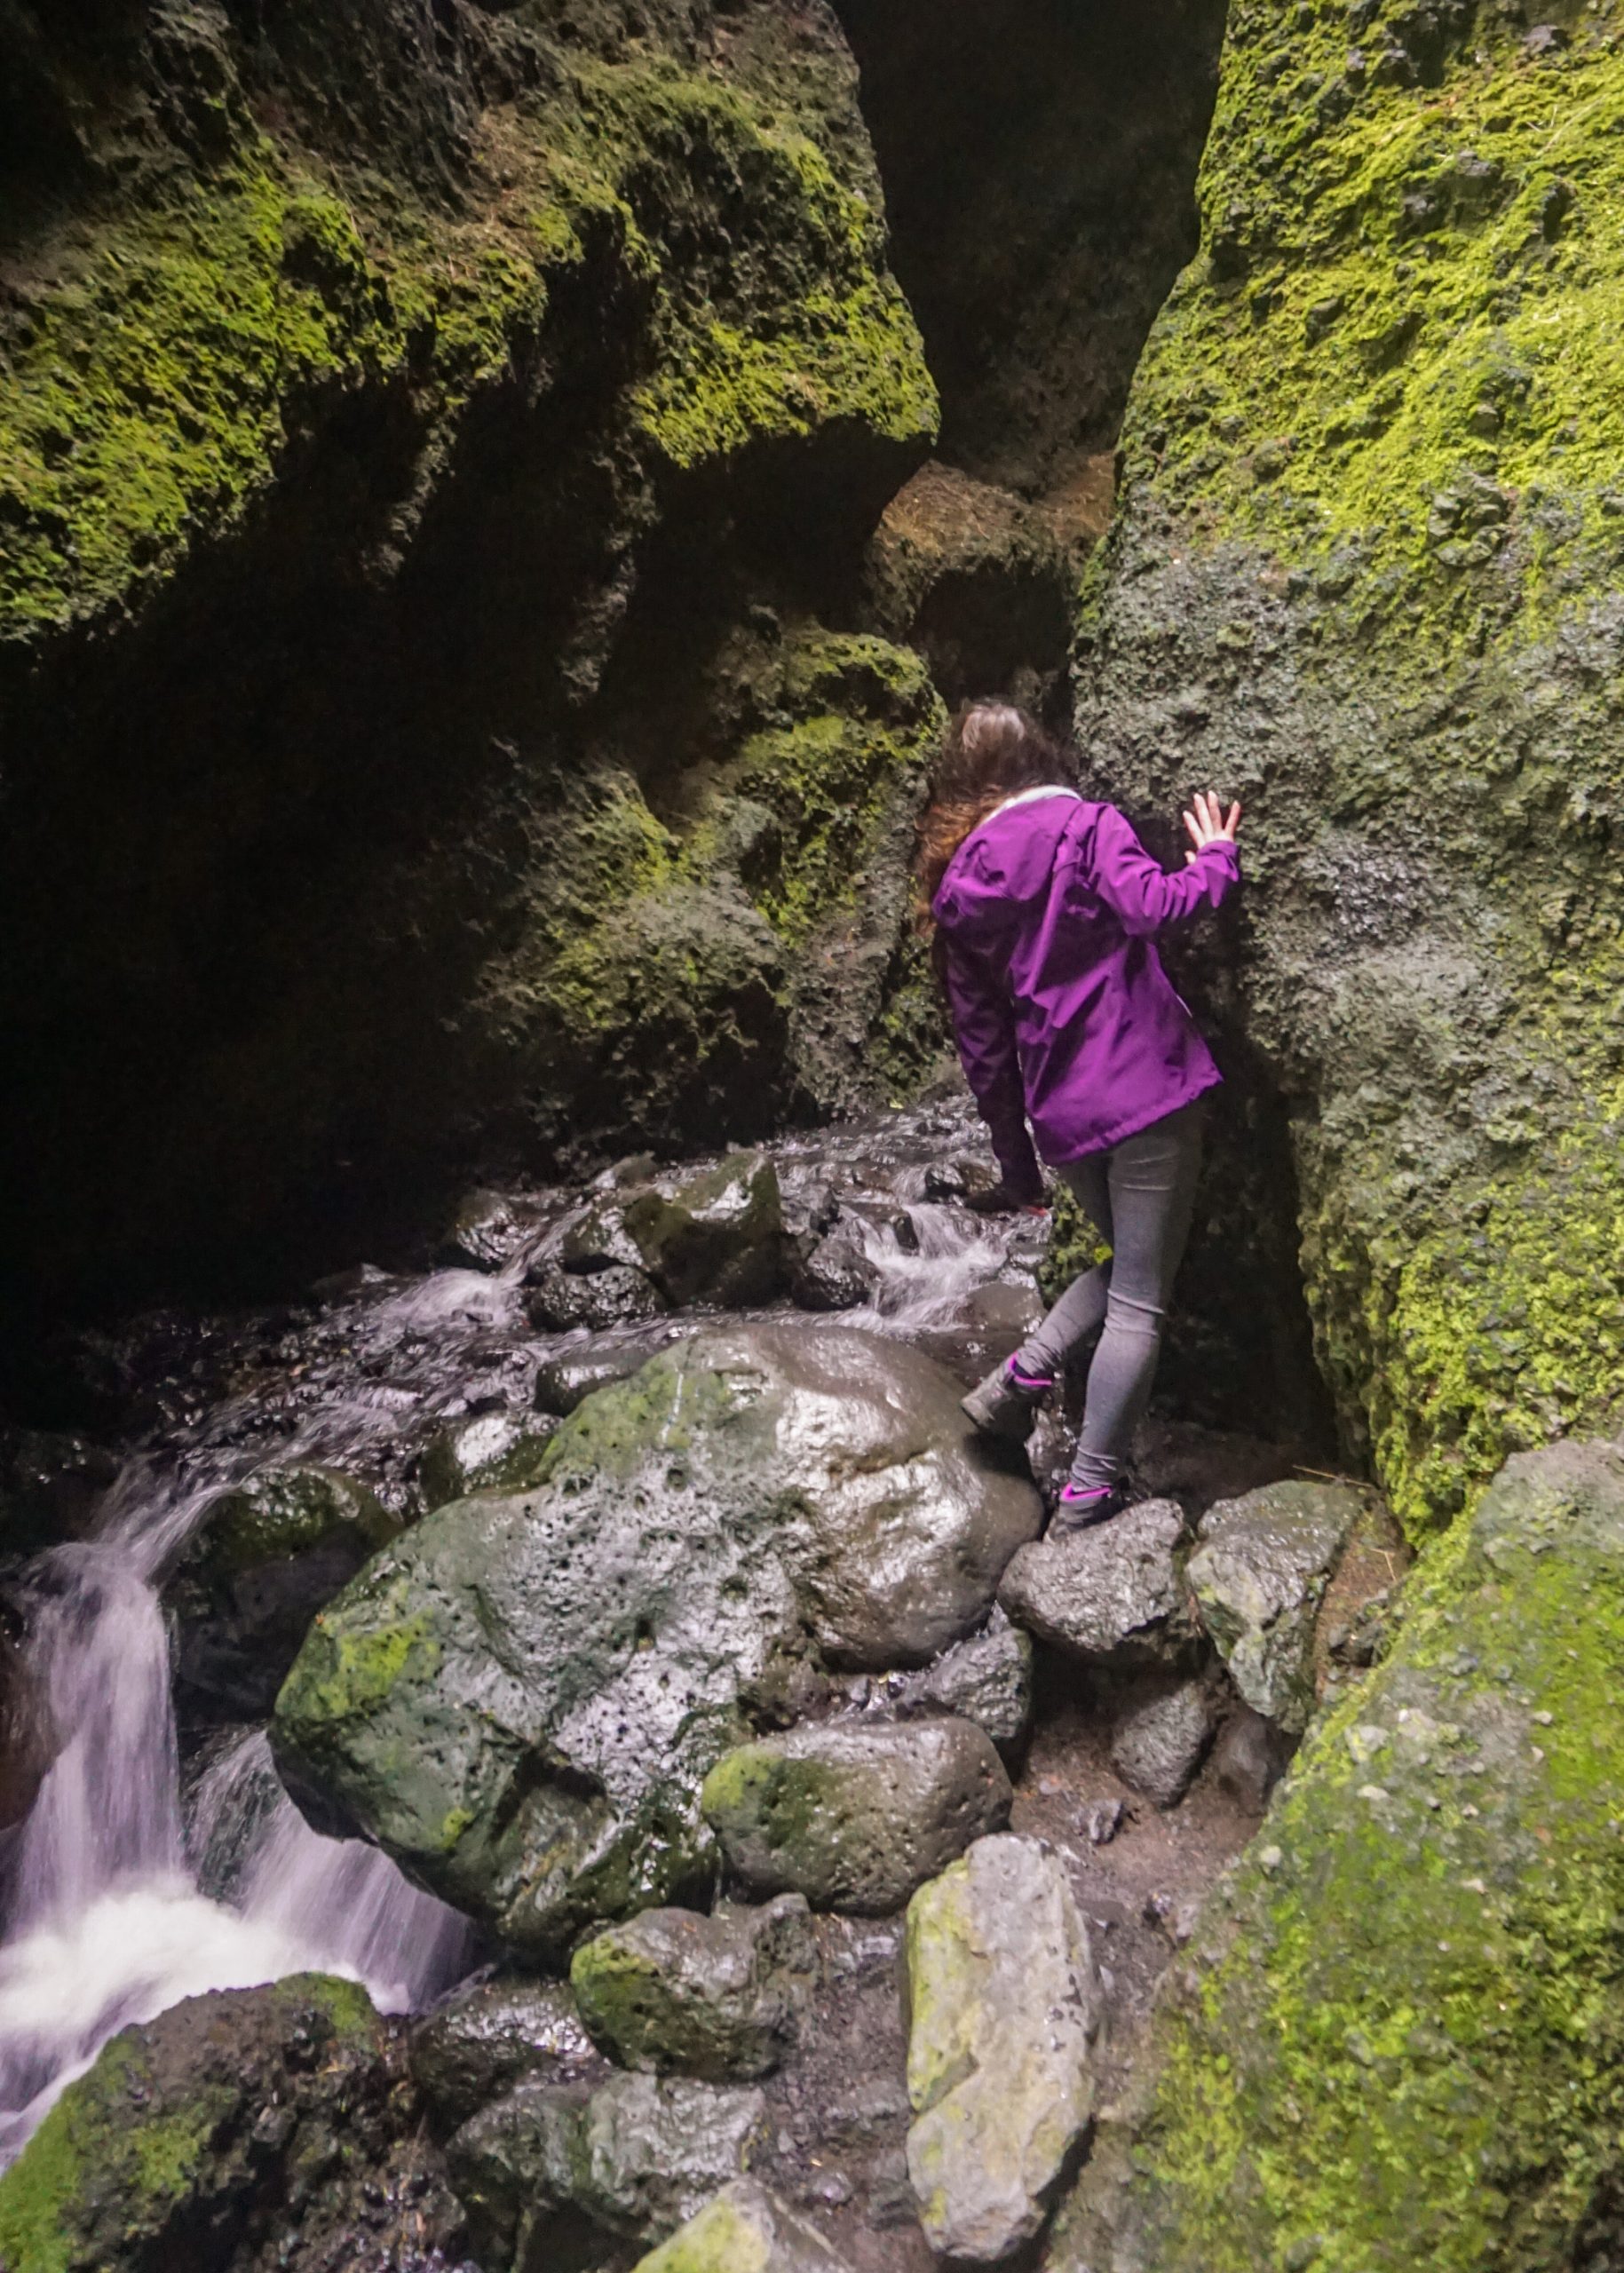 A girl wearing a pink jacket is looking inside a gorge